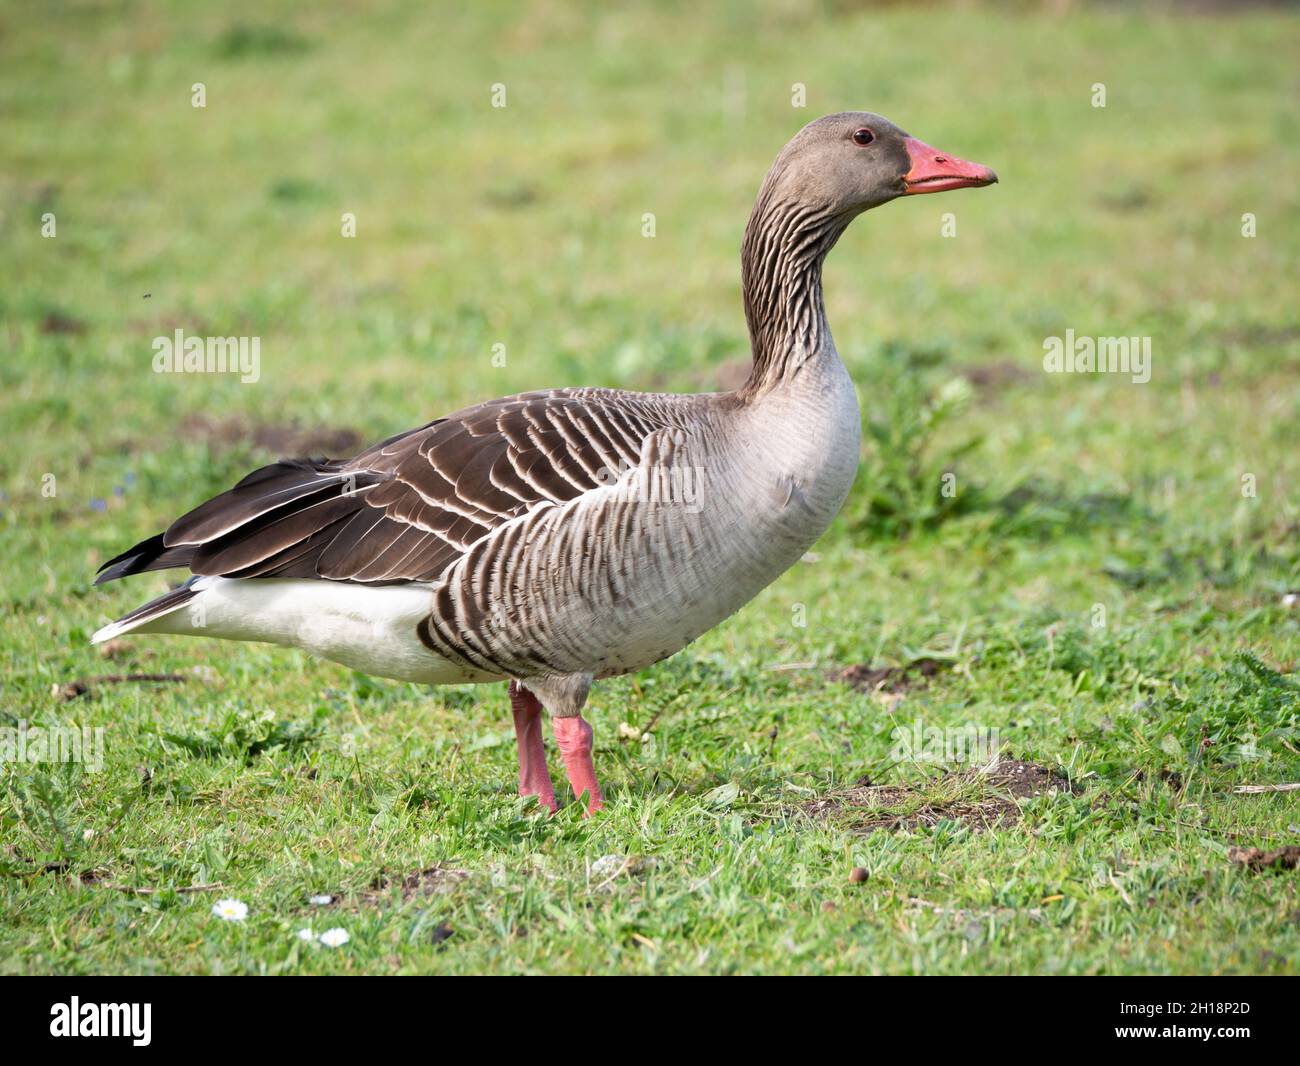 Greylag goose, Anser anser, side view of goose standing in grass, Netherlands Stock Photo